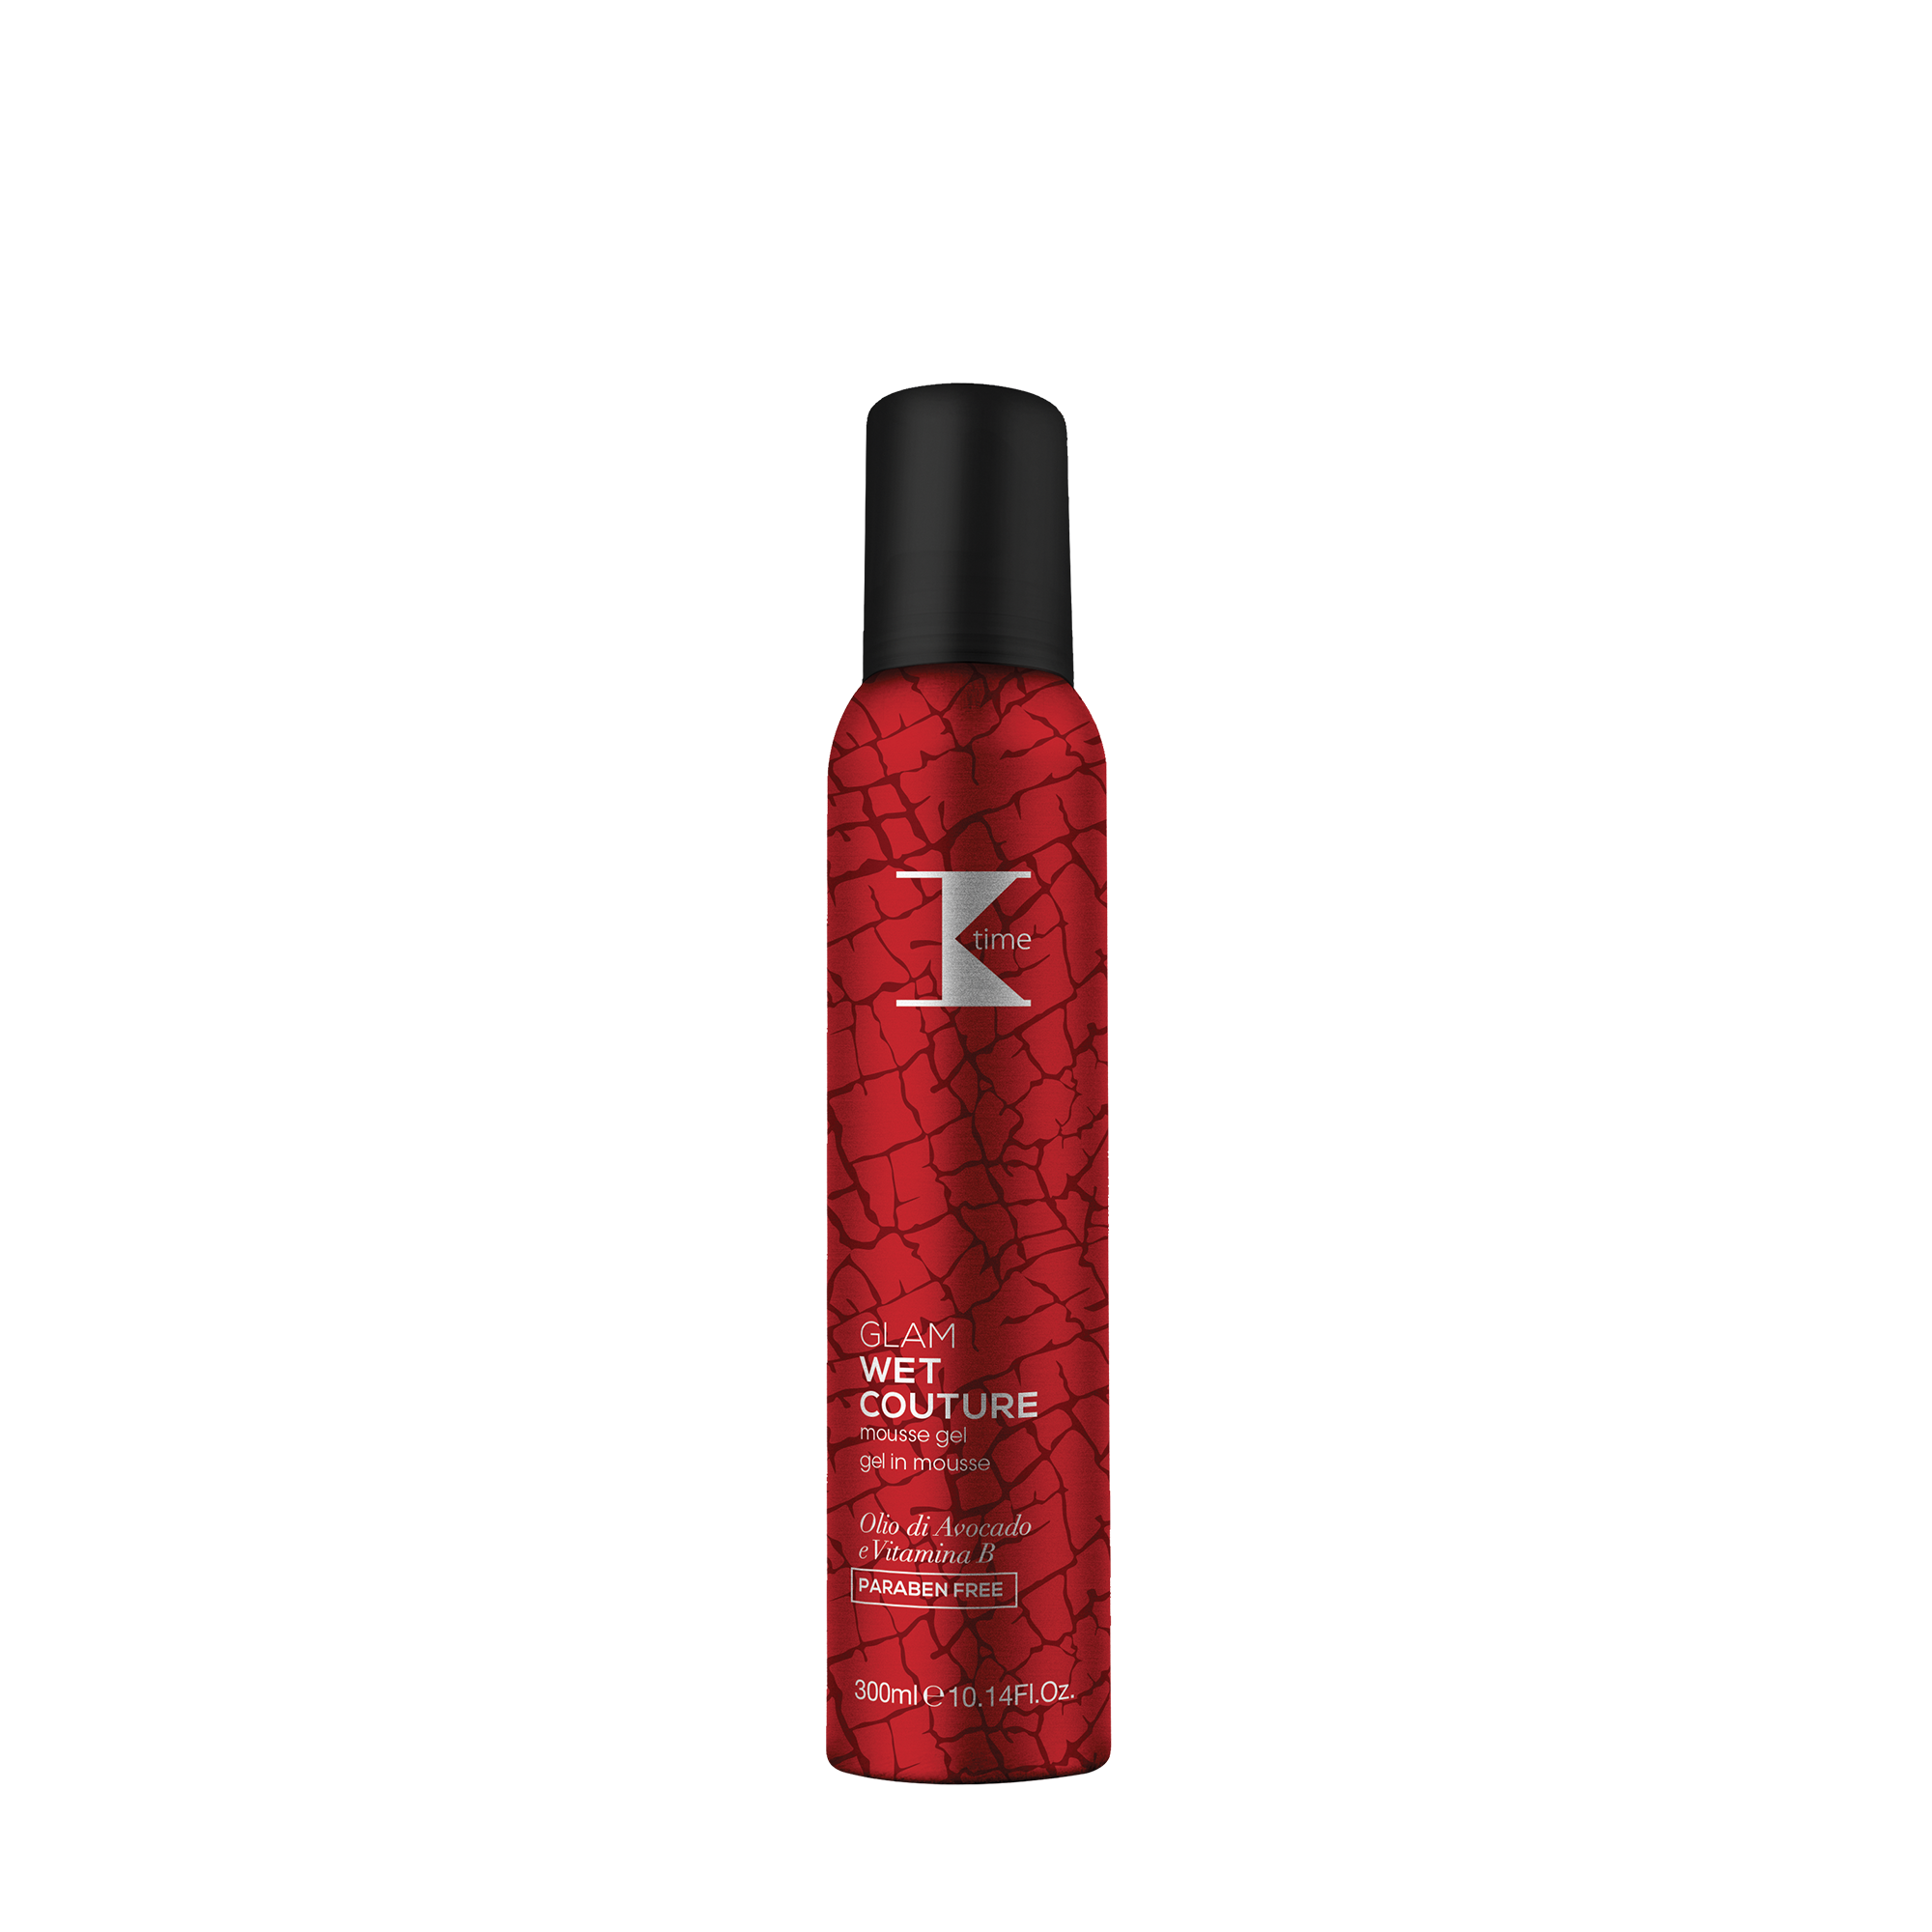 K-TIME GLAM WET COUTURE GEL IN MOUSSE 300ML